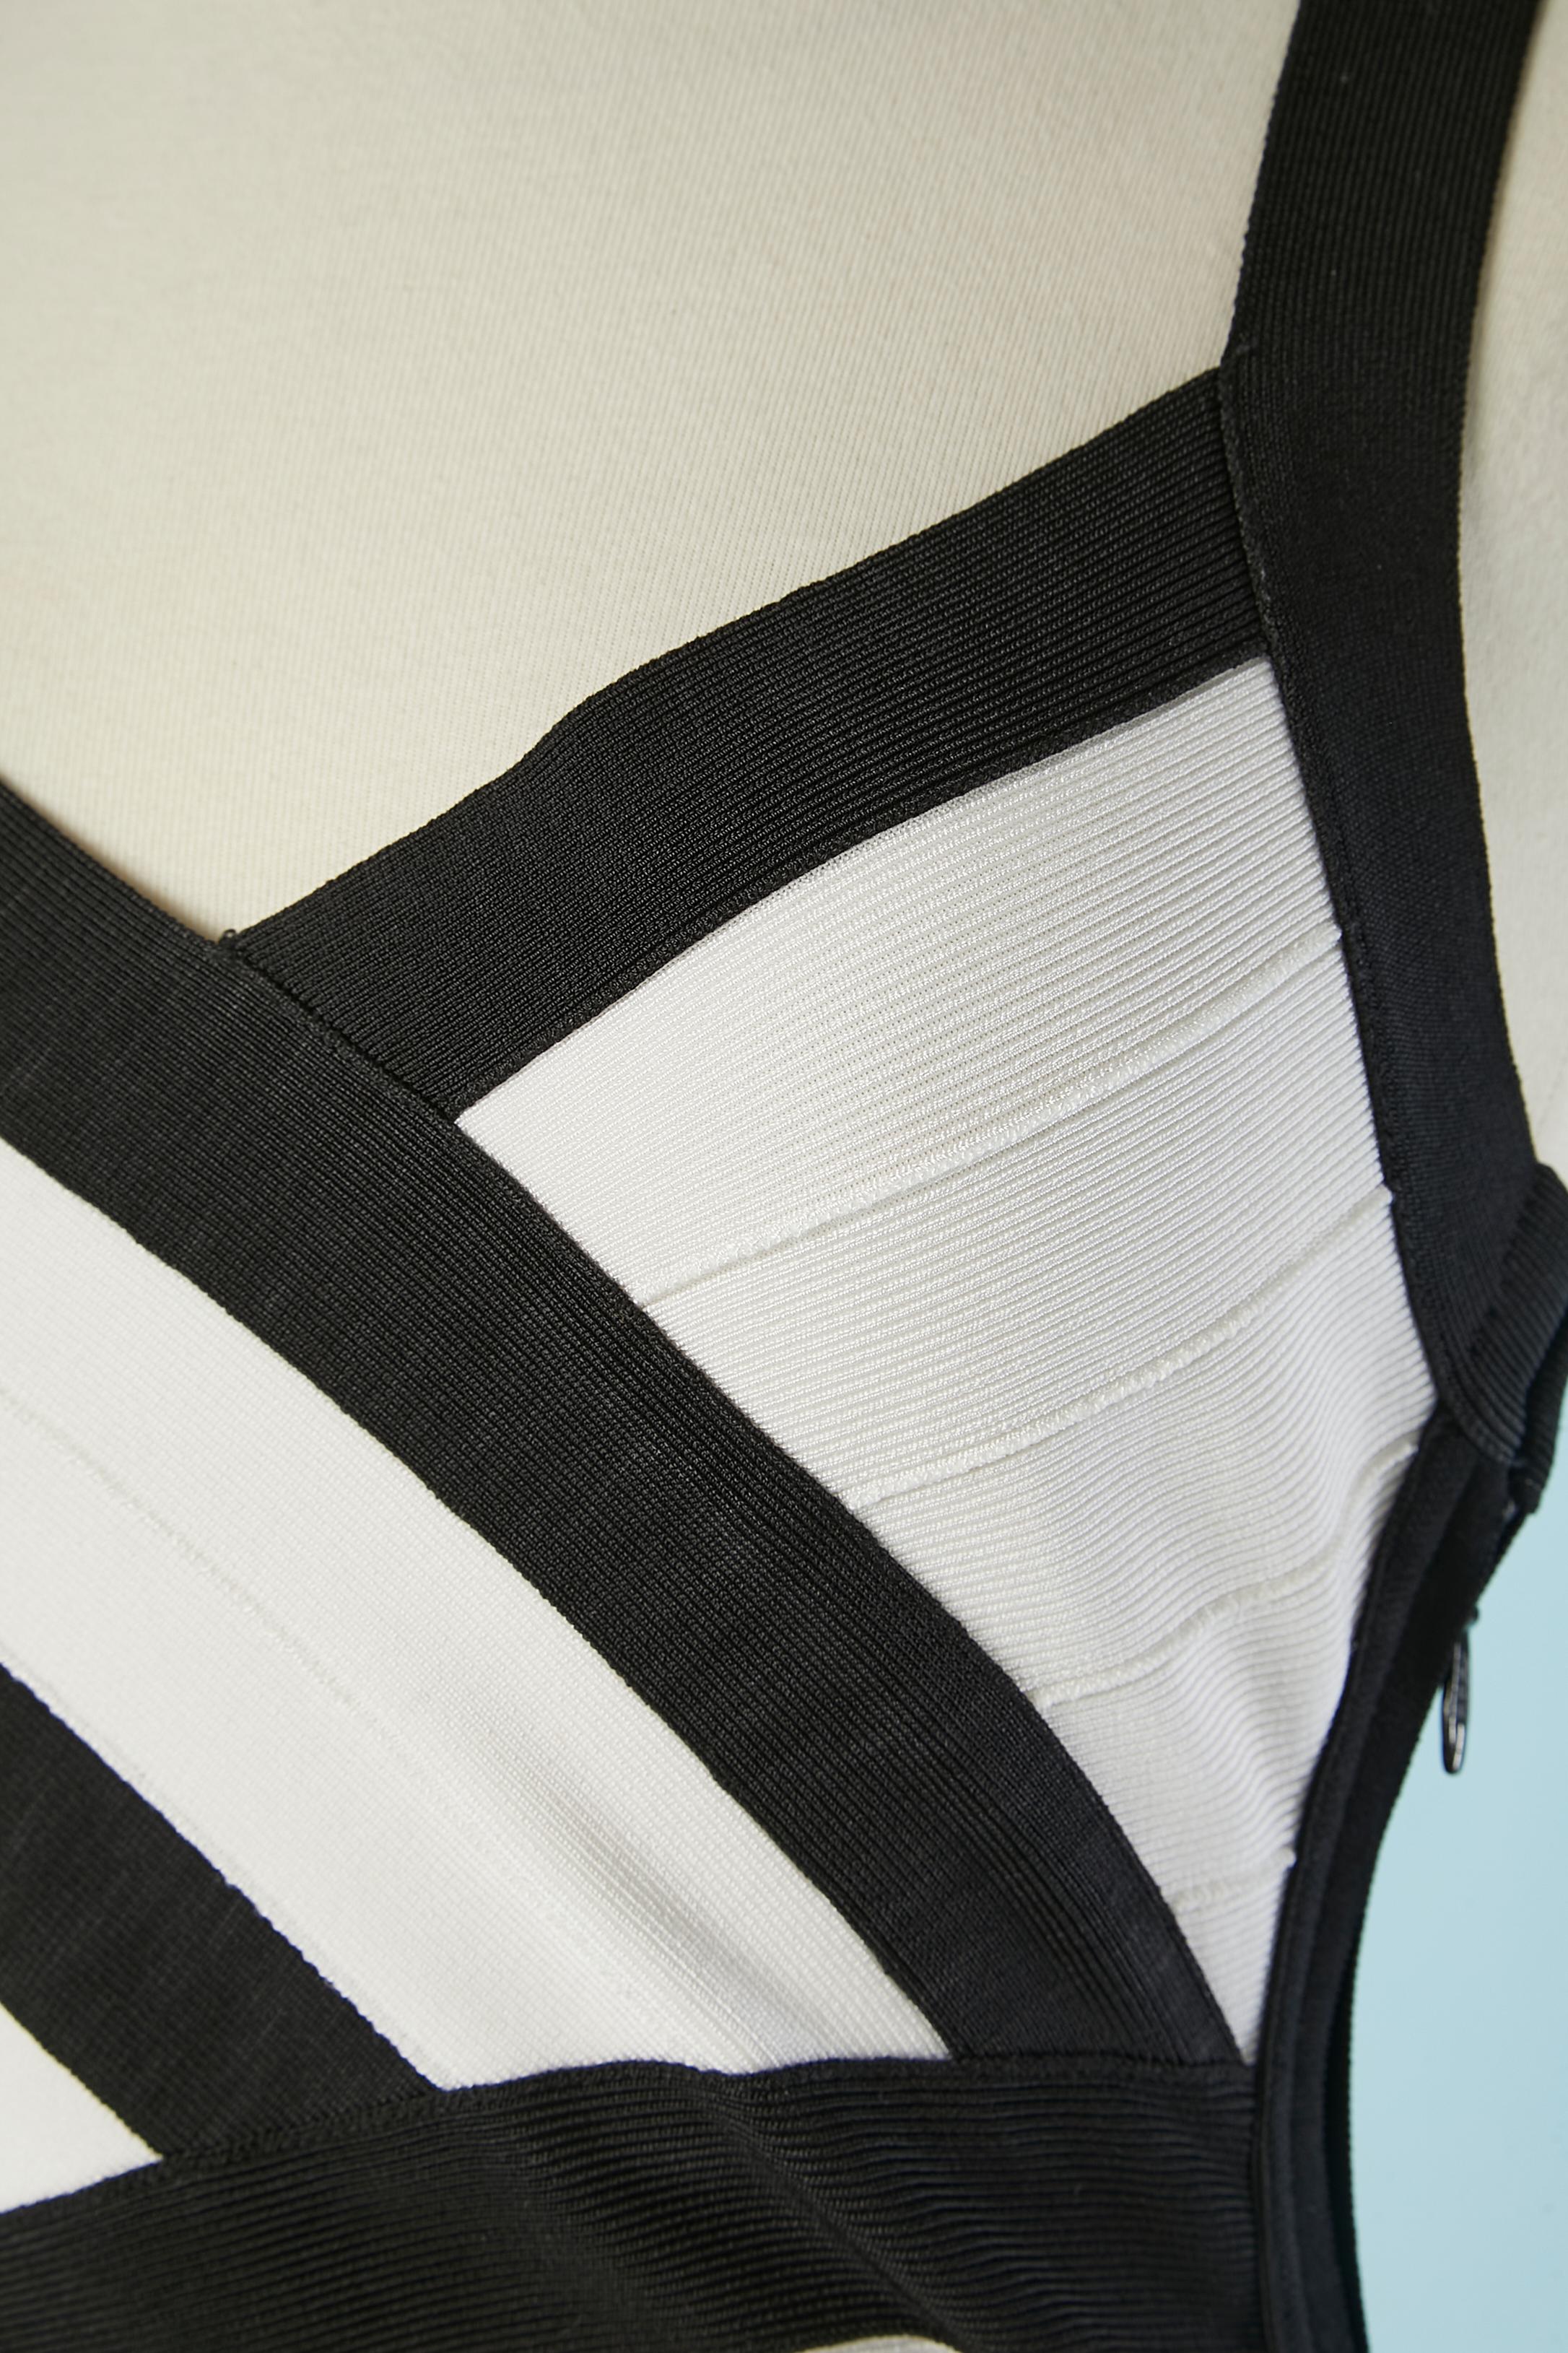 Black and white knit rayon cocktail dress. Fabric composition: 90% rayon, 9% nylon, 1% spandex. 
Zip on the left side + 3 hook&eye. 
Size M on the tag but fit more likely XS